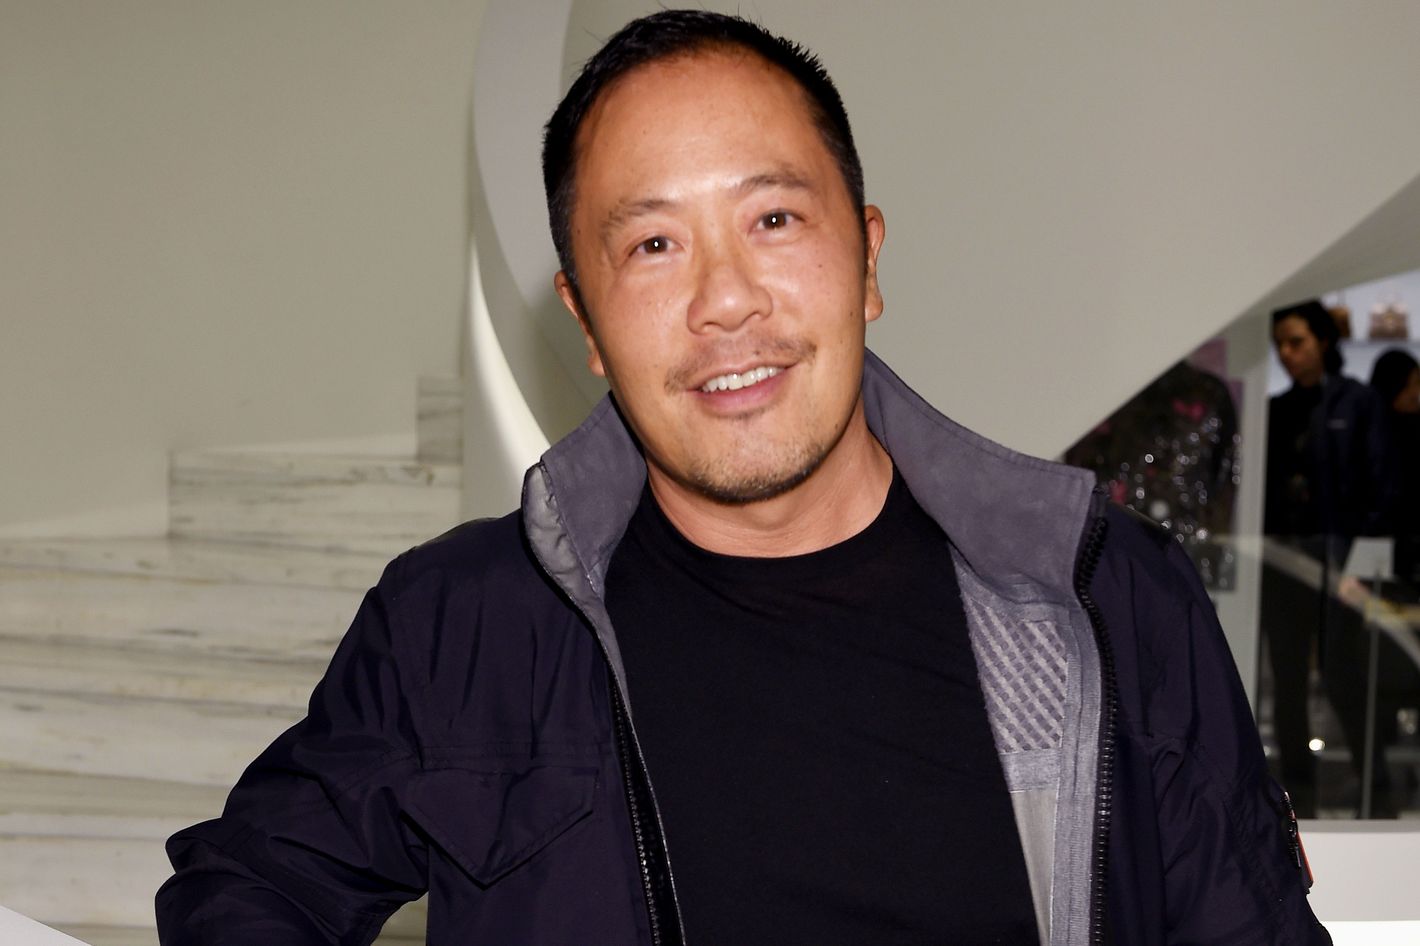 Derek Lam Works With the Cerebral Palsy Foundation